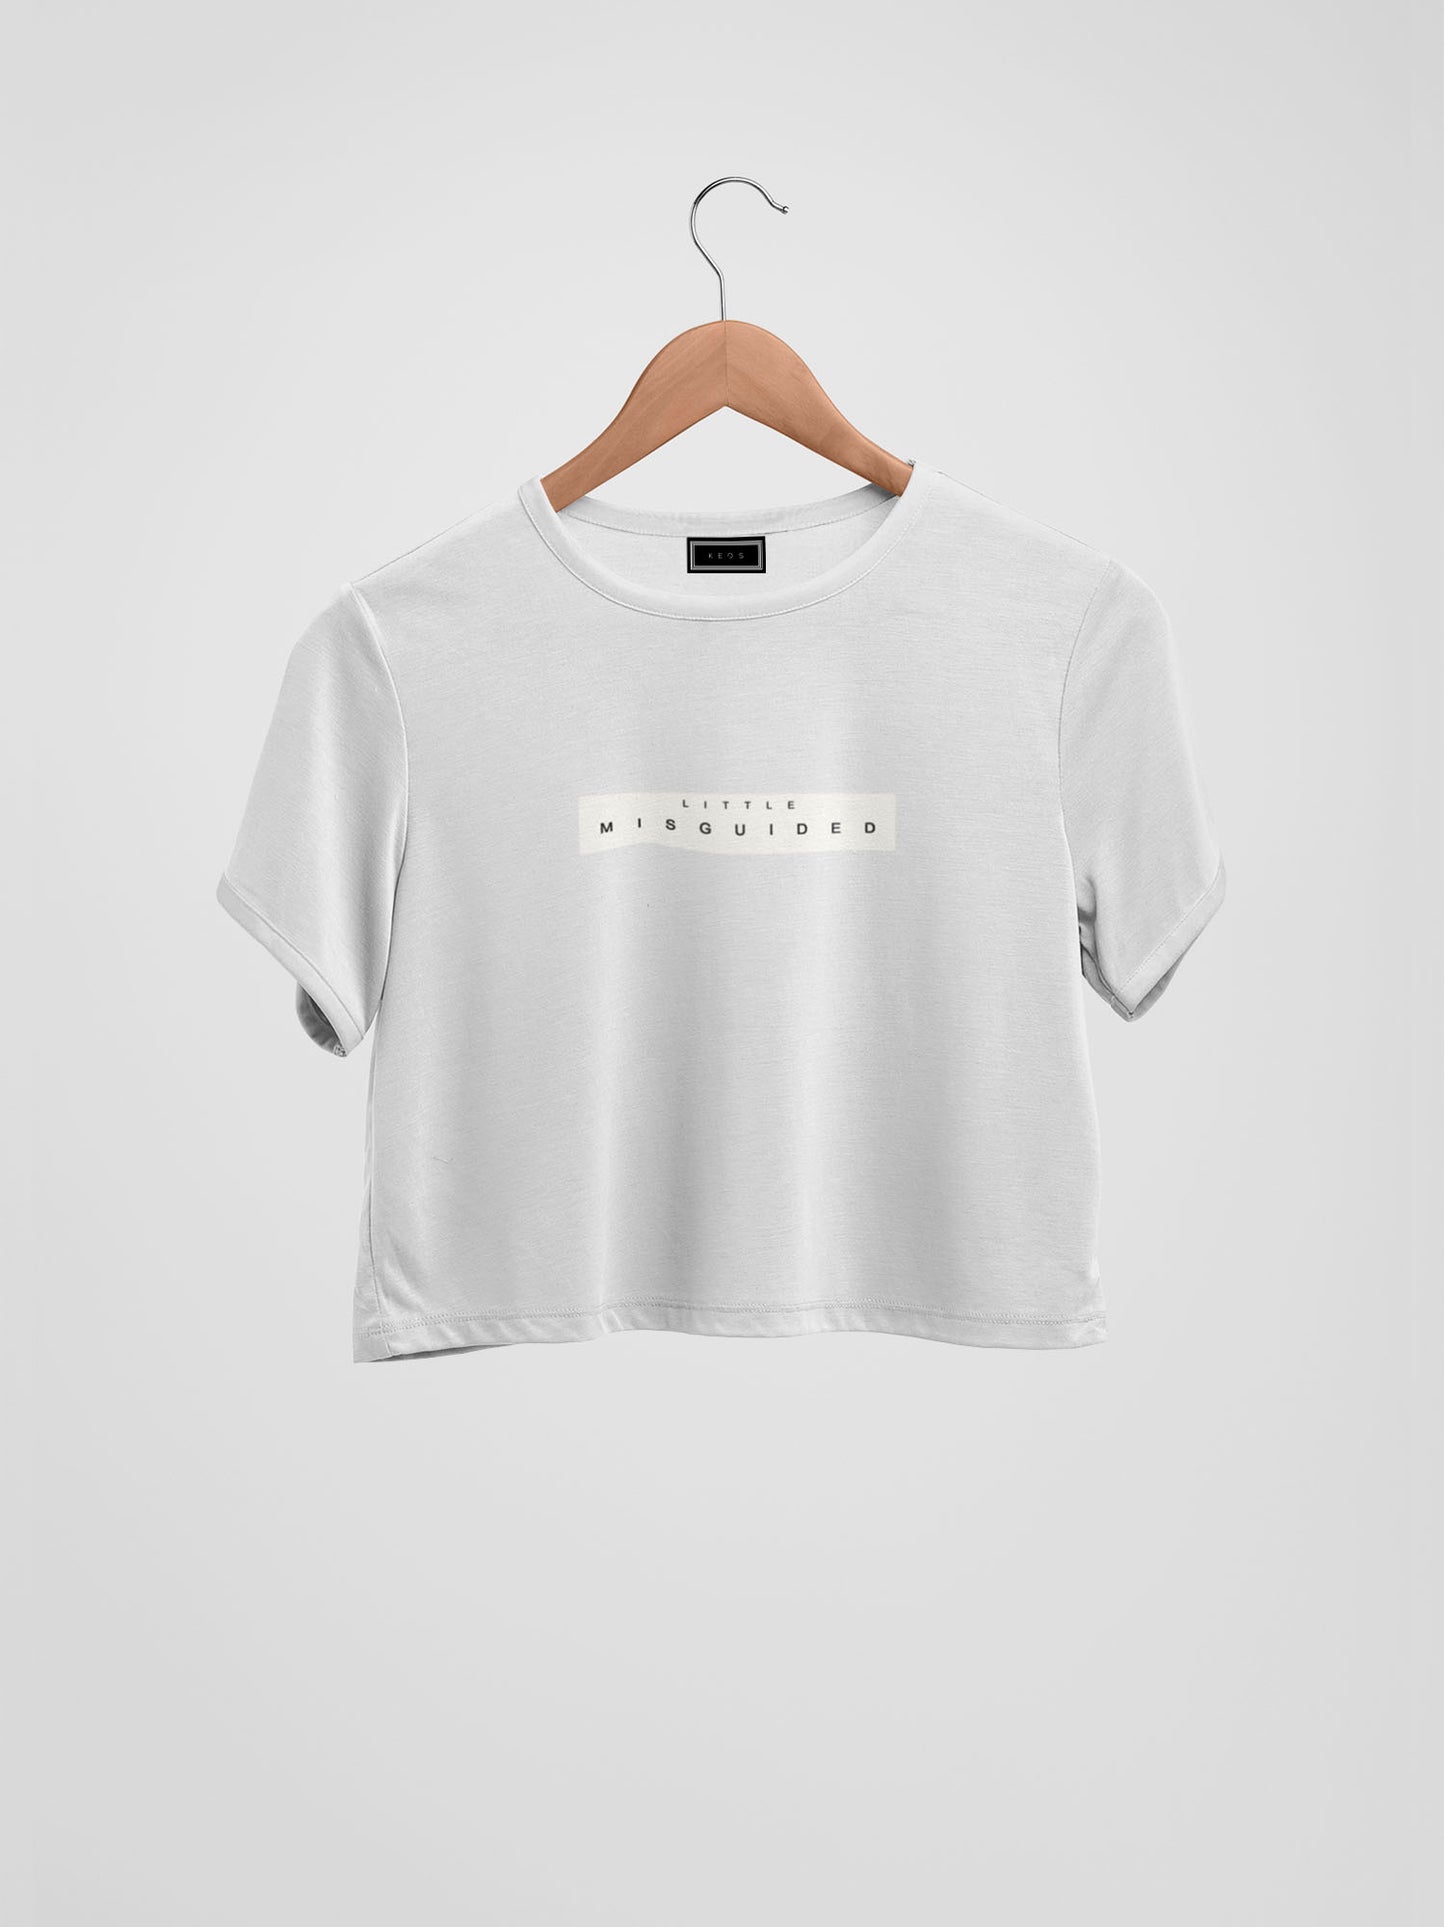 Little Misguided Organic Cotton Crop Top - keos.life